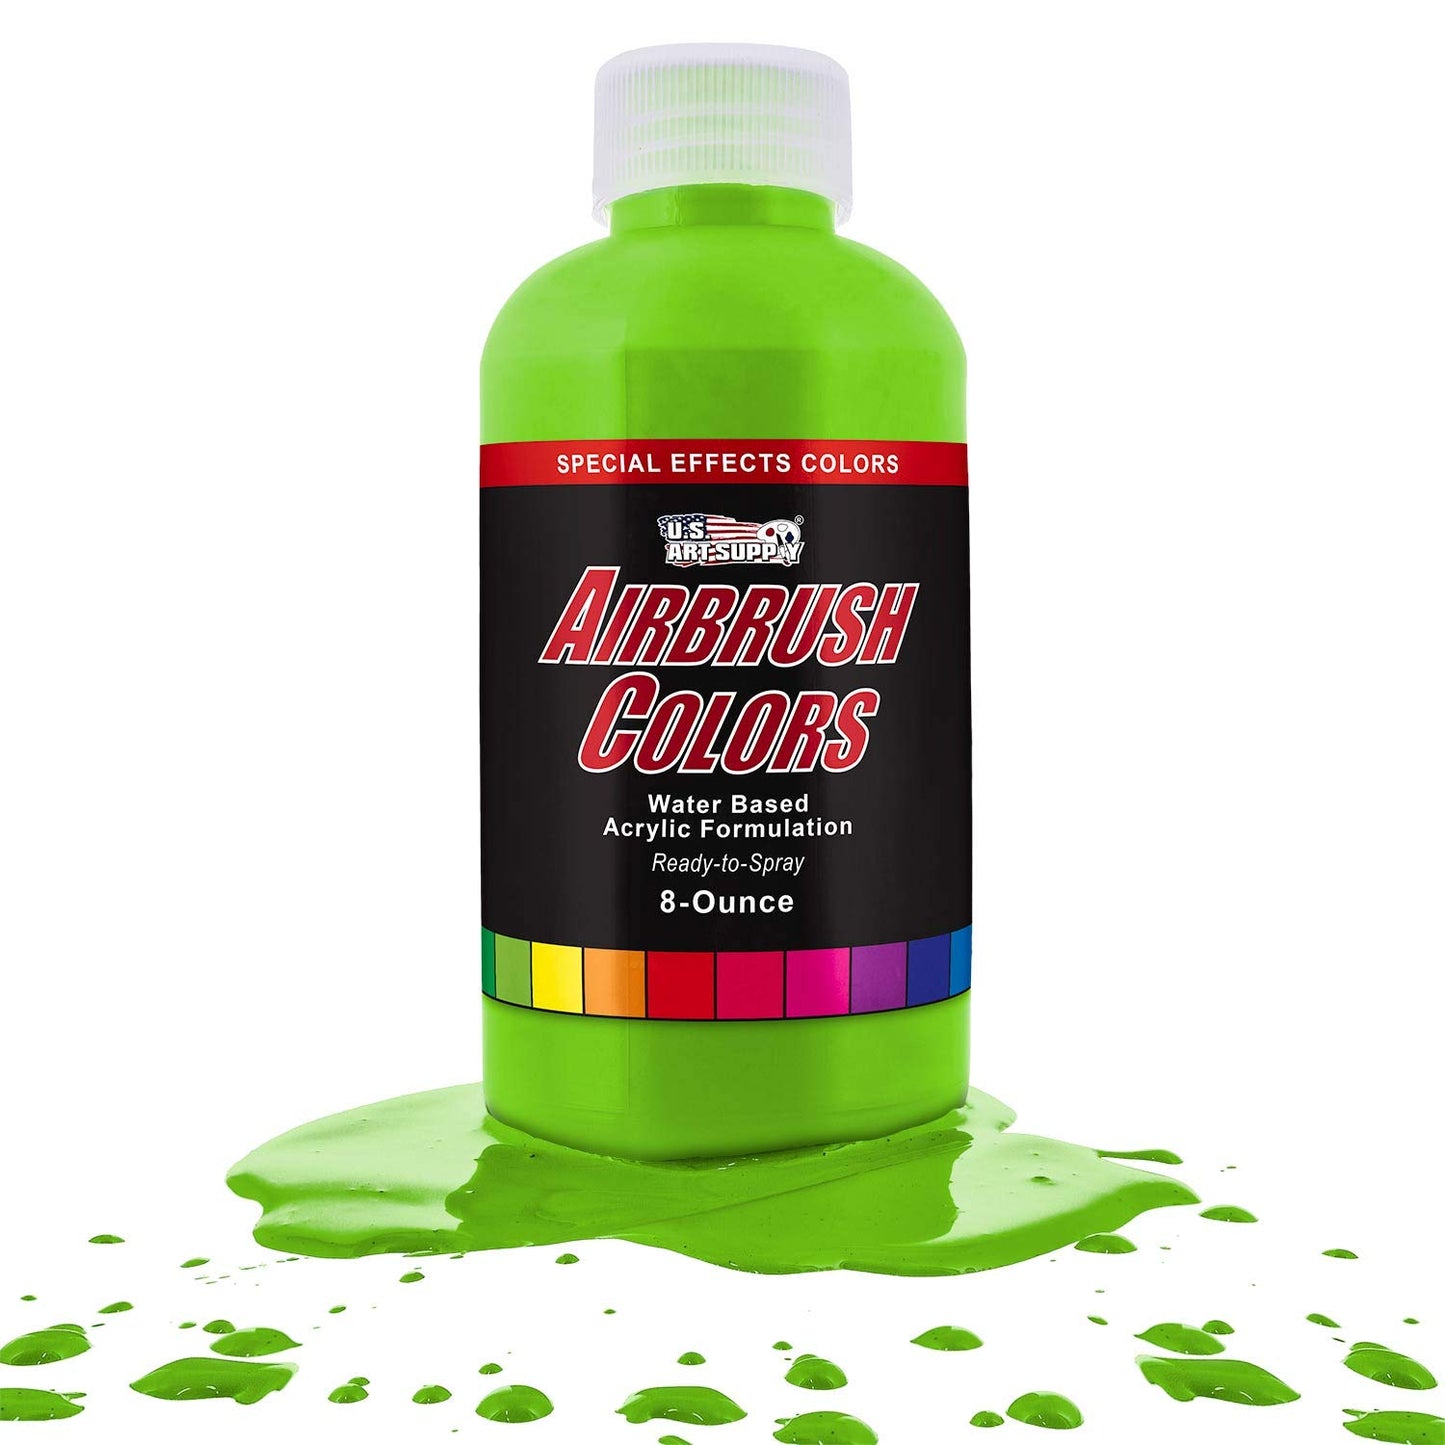 U.S. Art Supply Neon Green Fluorescent Special Effects Acrylic Airbrush Paint 8 oz.